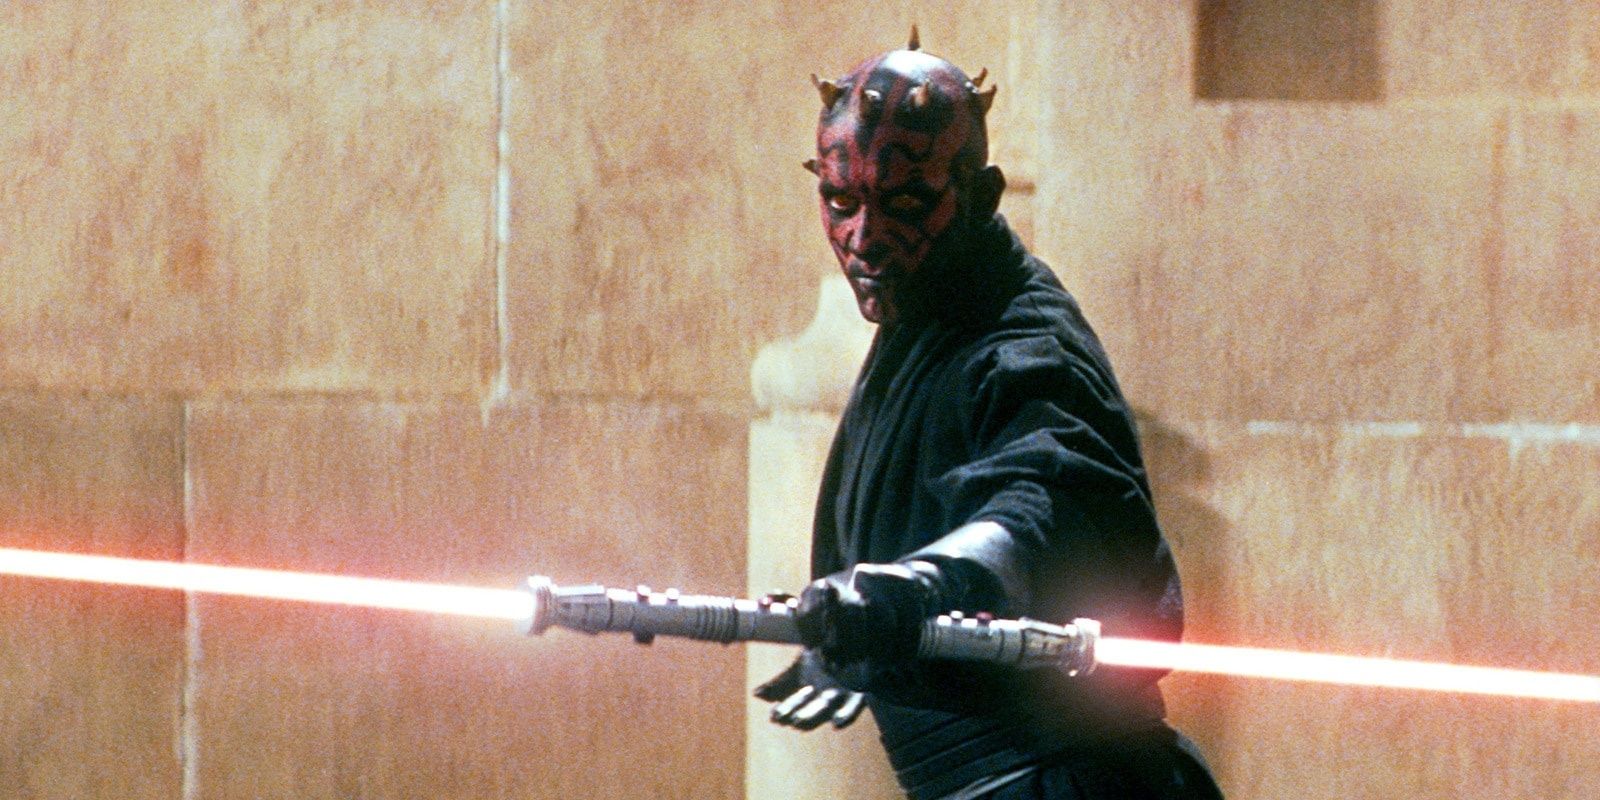 Darth Maul ignites his double-bladed lightsaber in The Phantom Menace